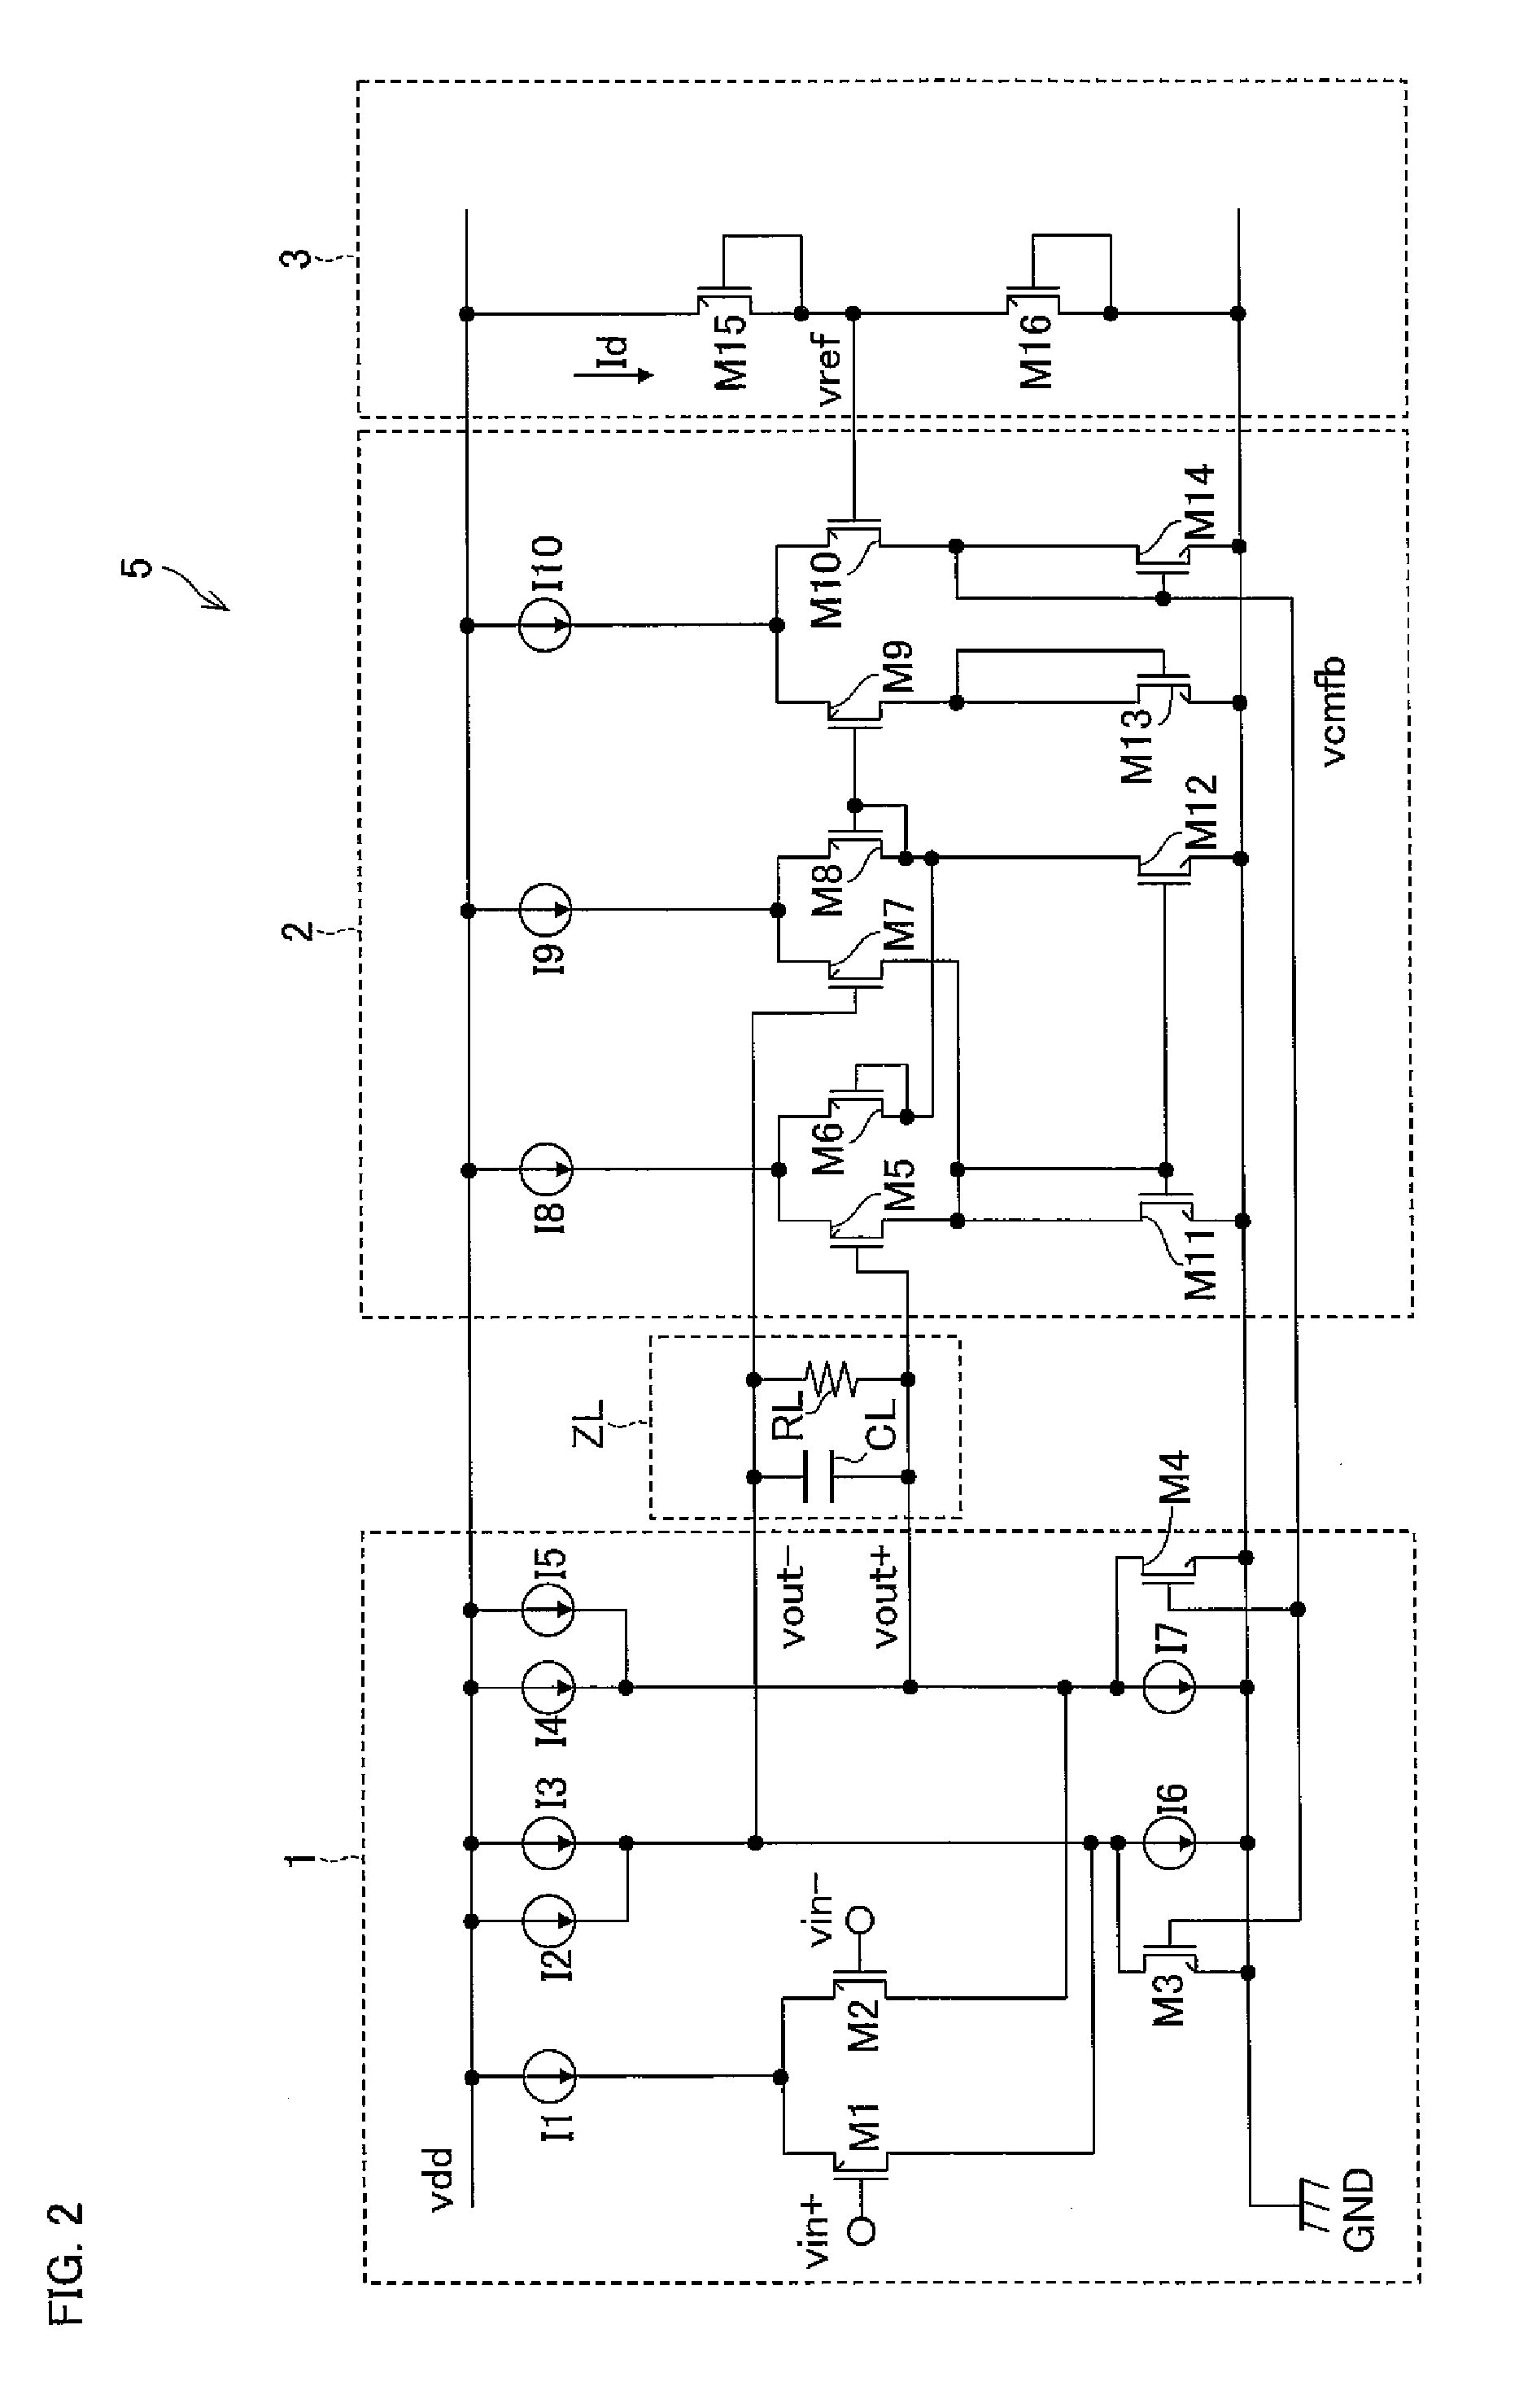 Operational amplifier circuit, bandpass filter circuit, and infrared signal processing circuit